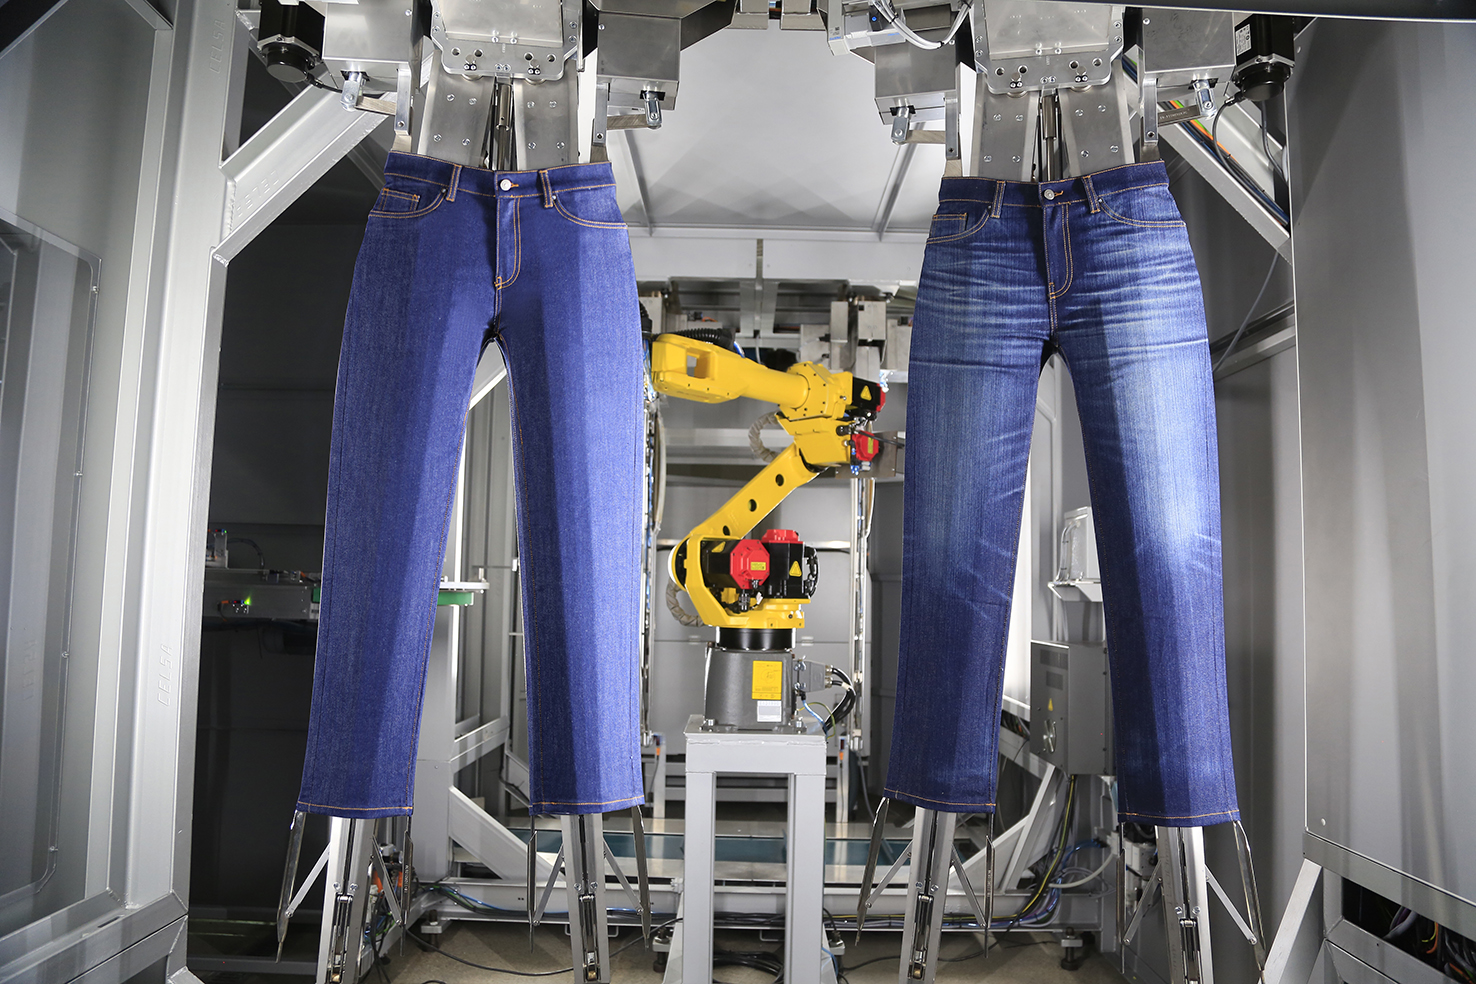 Creating the sustainable future of denim through automation